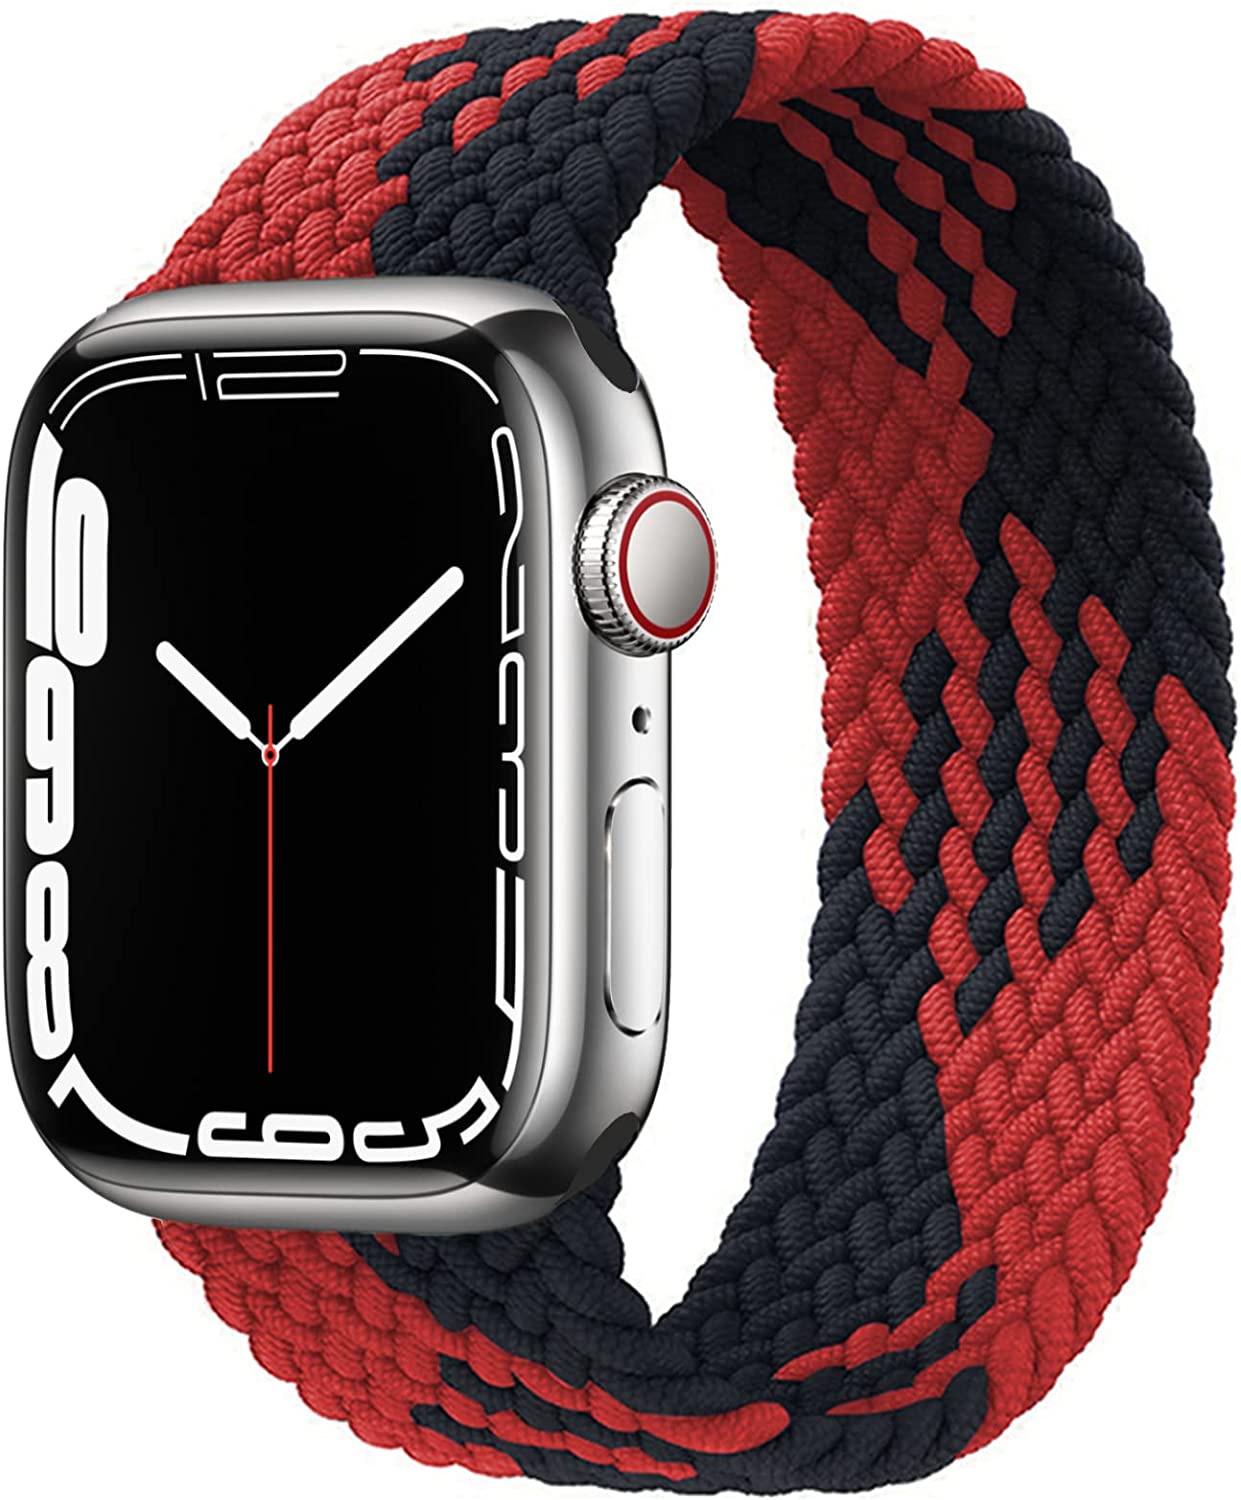 Mixed Color Nylon Braided Single Loop Band For Apple Watch